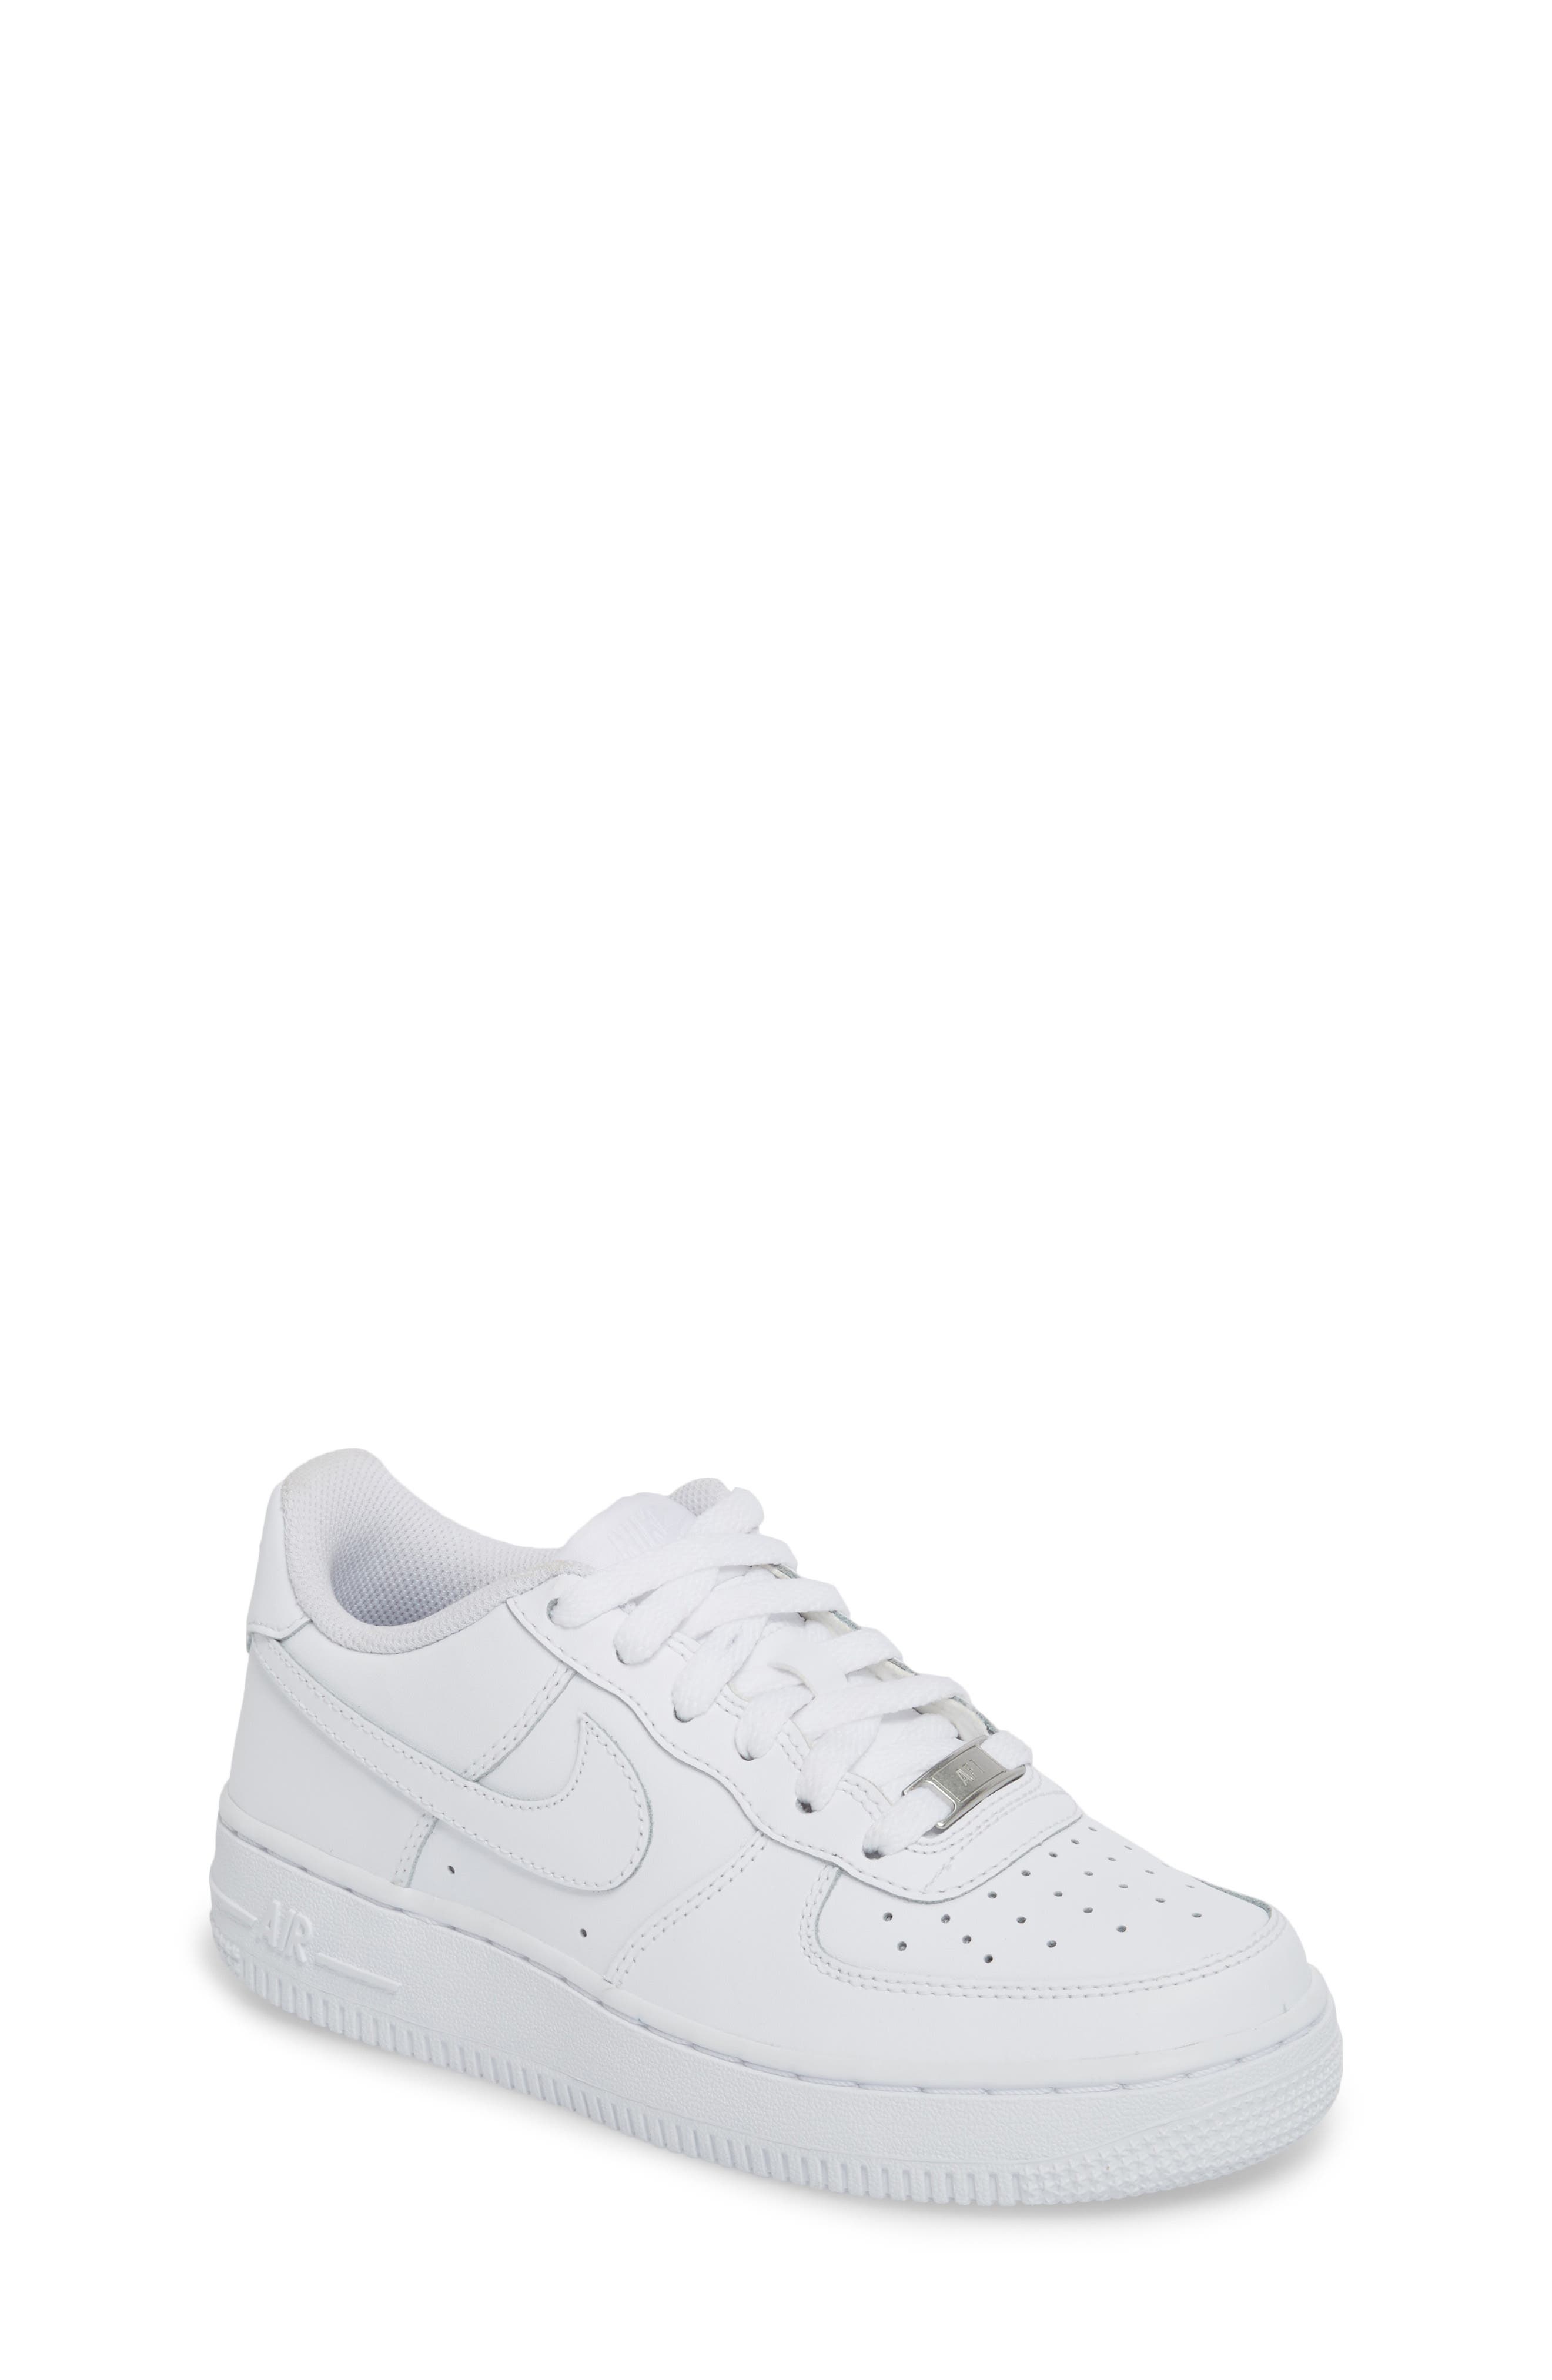 air force one tennis shoes white